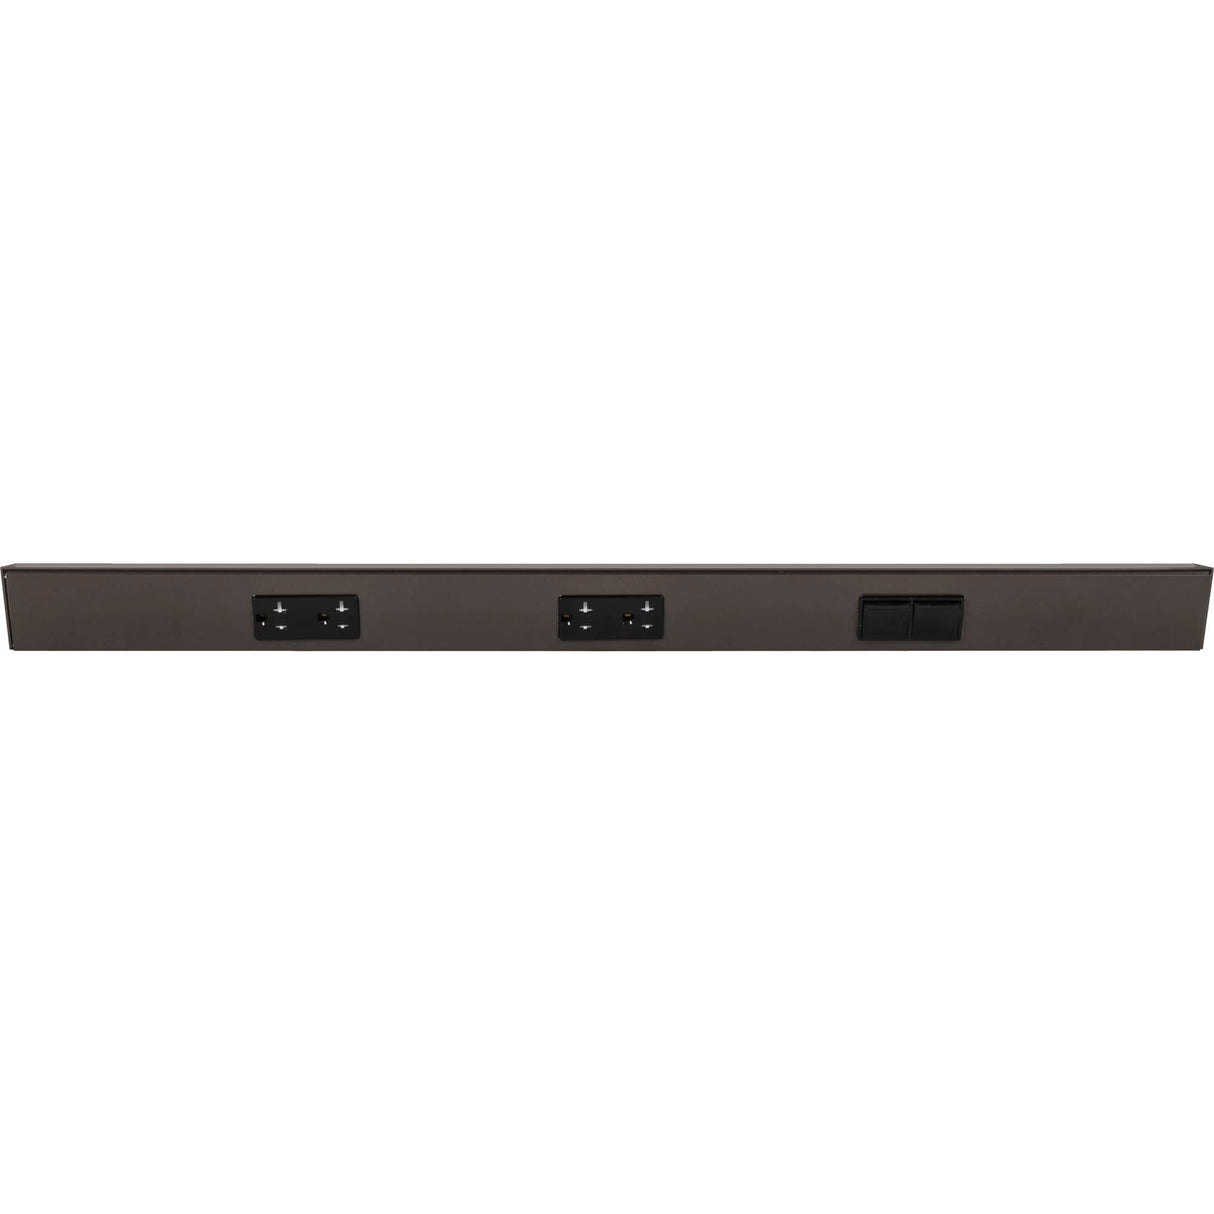 Task Lighting TRS30-3B-BZ-RS 30" TR Switch Series Angle Power Strip, Right Switches, Bronze Finish, Black Switches and Receptacles